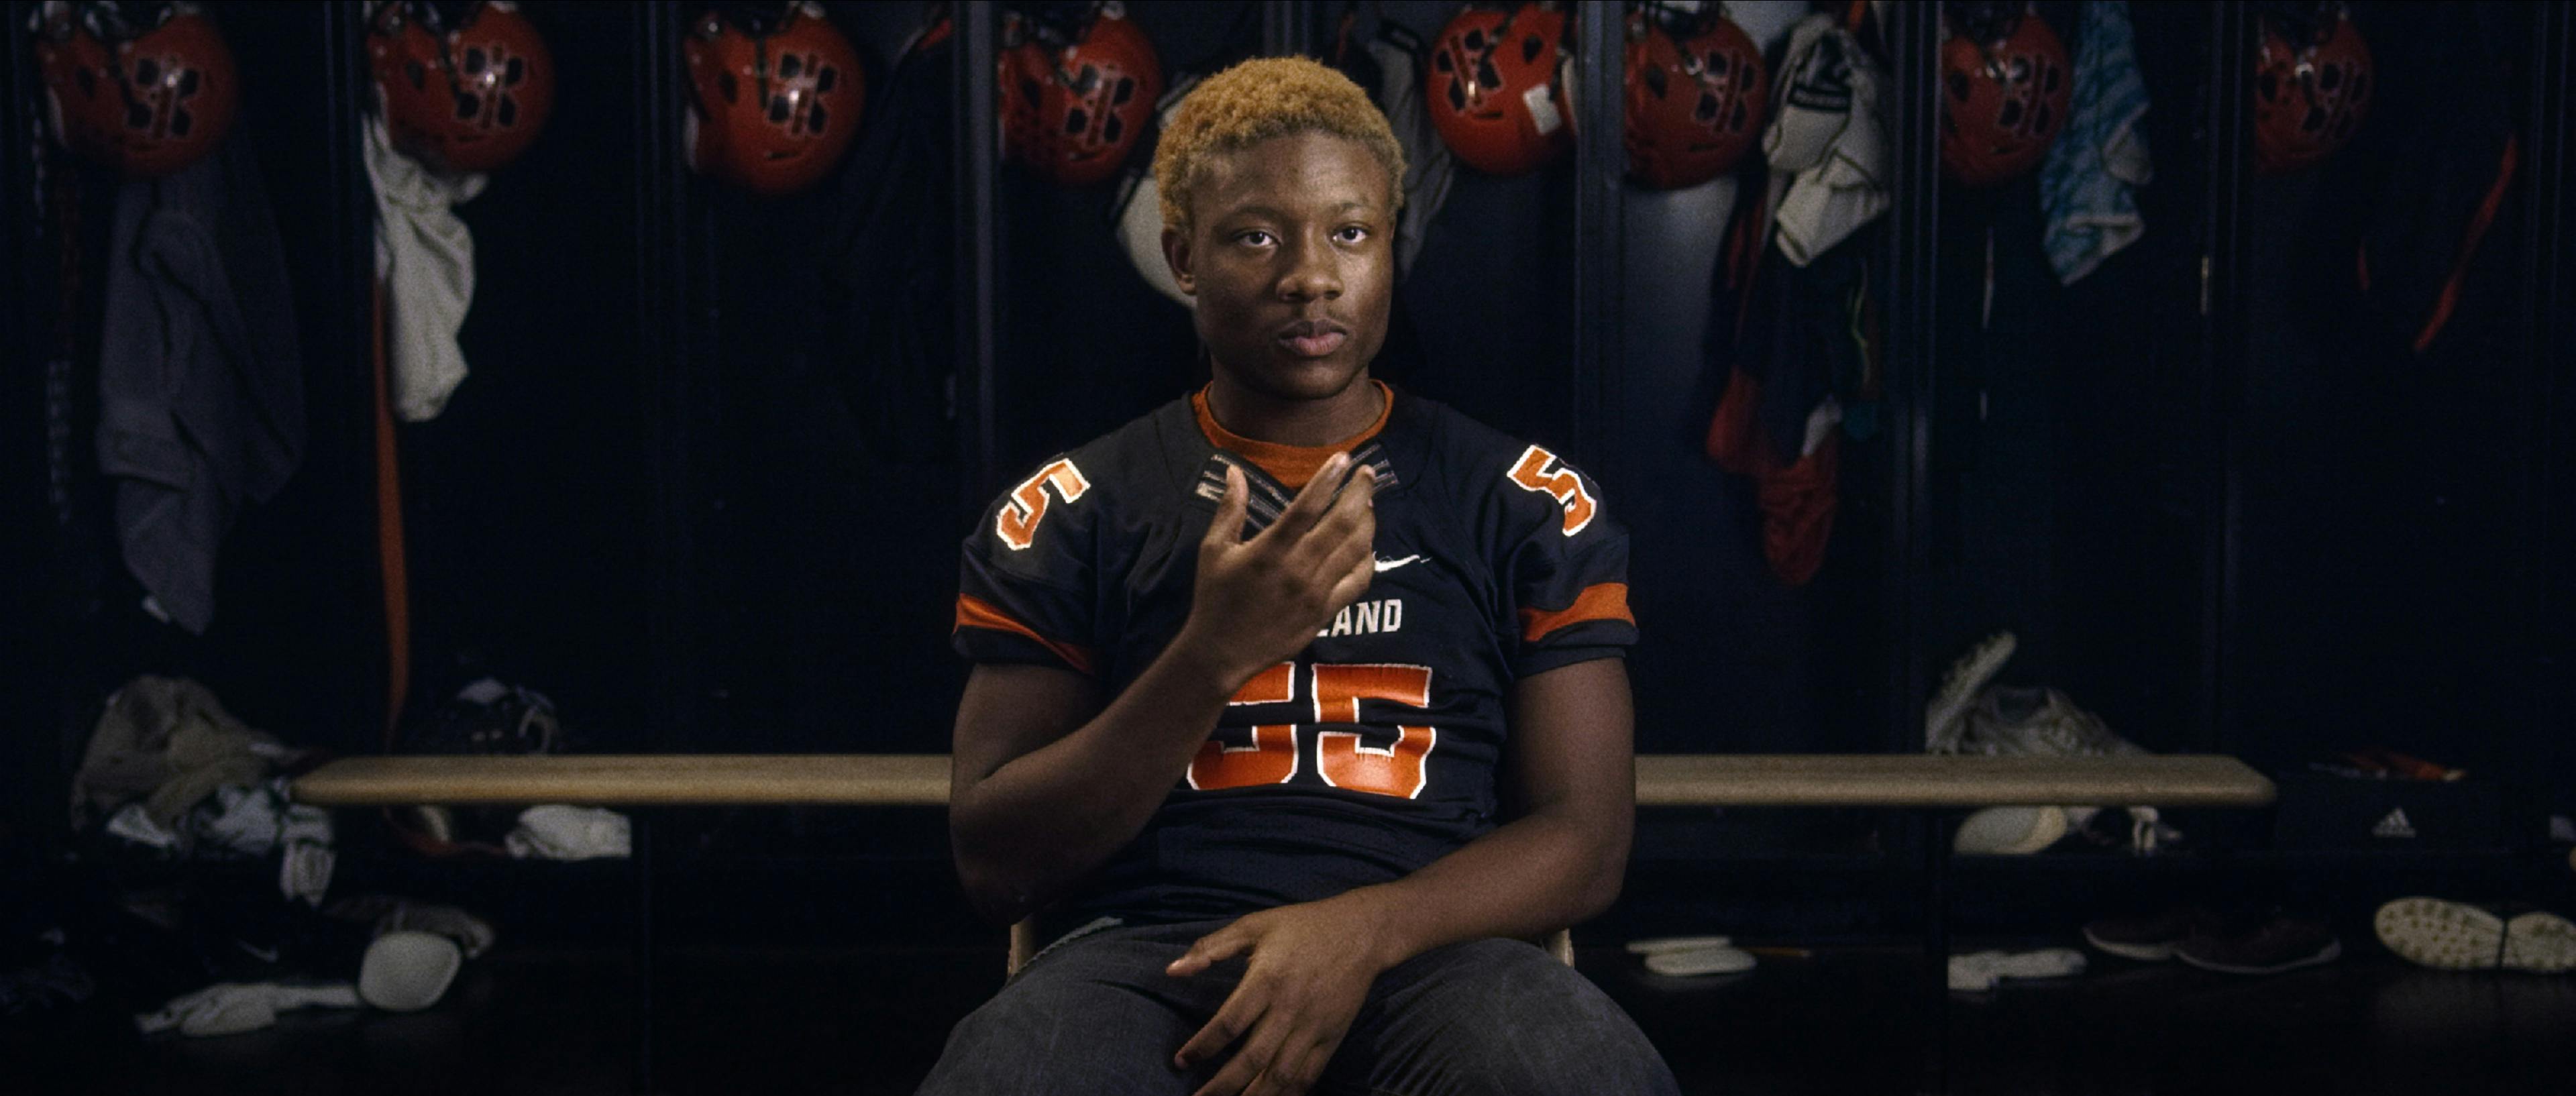 Amaree McKenstry-Hall wears his MSD black and orange jersey and sits in a lockeroom. 